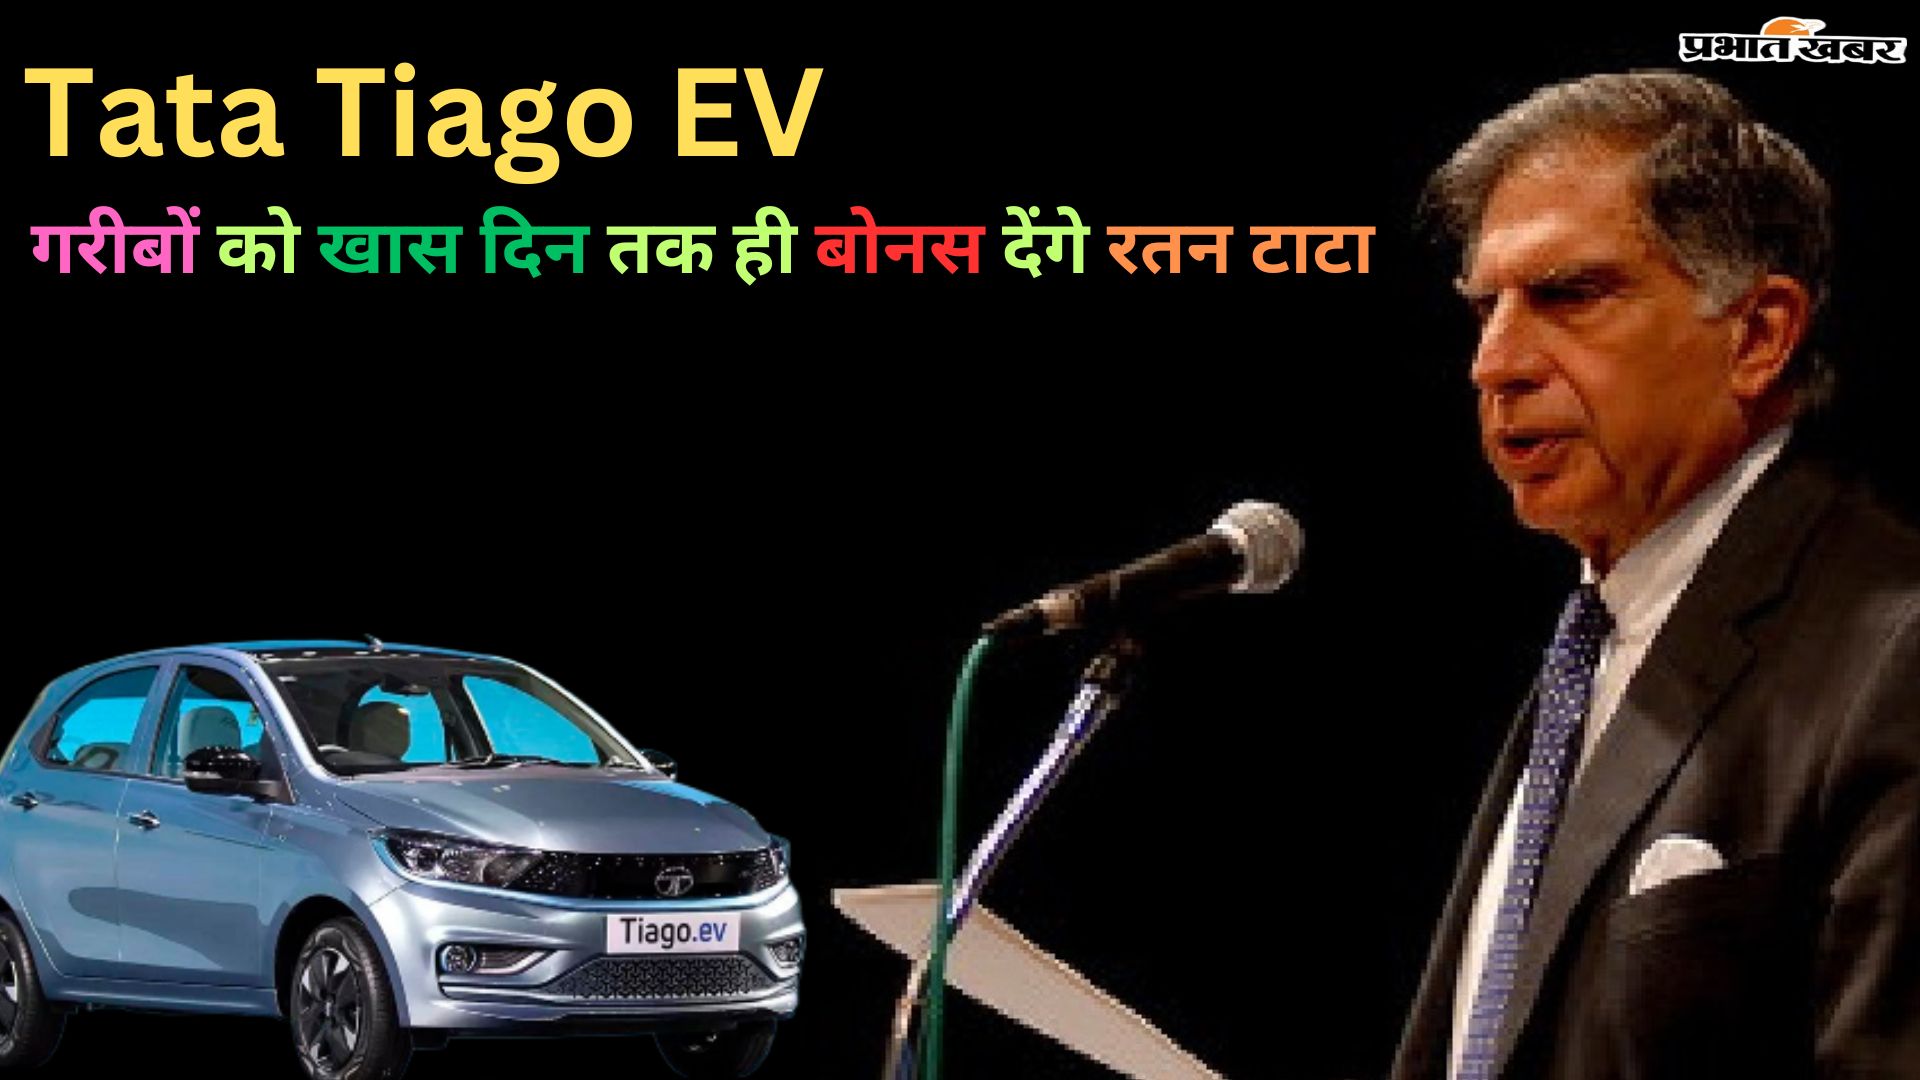 Ratan Tata will give bonus on Tata Tiago EV to the poor only till special day